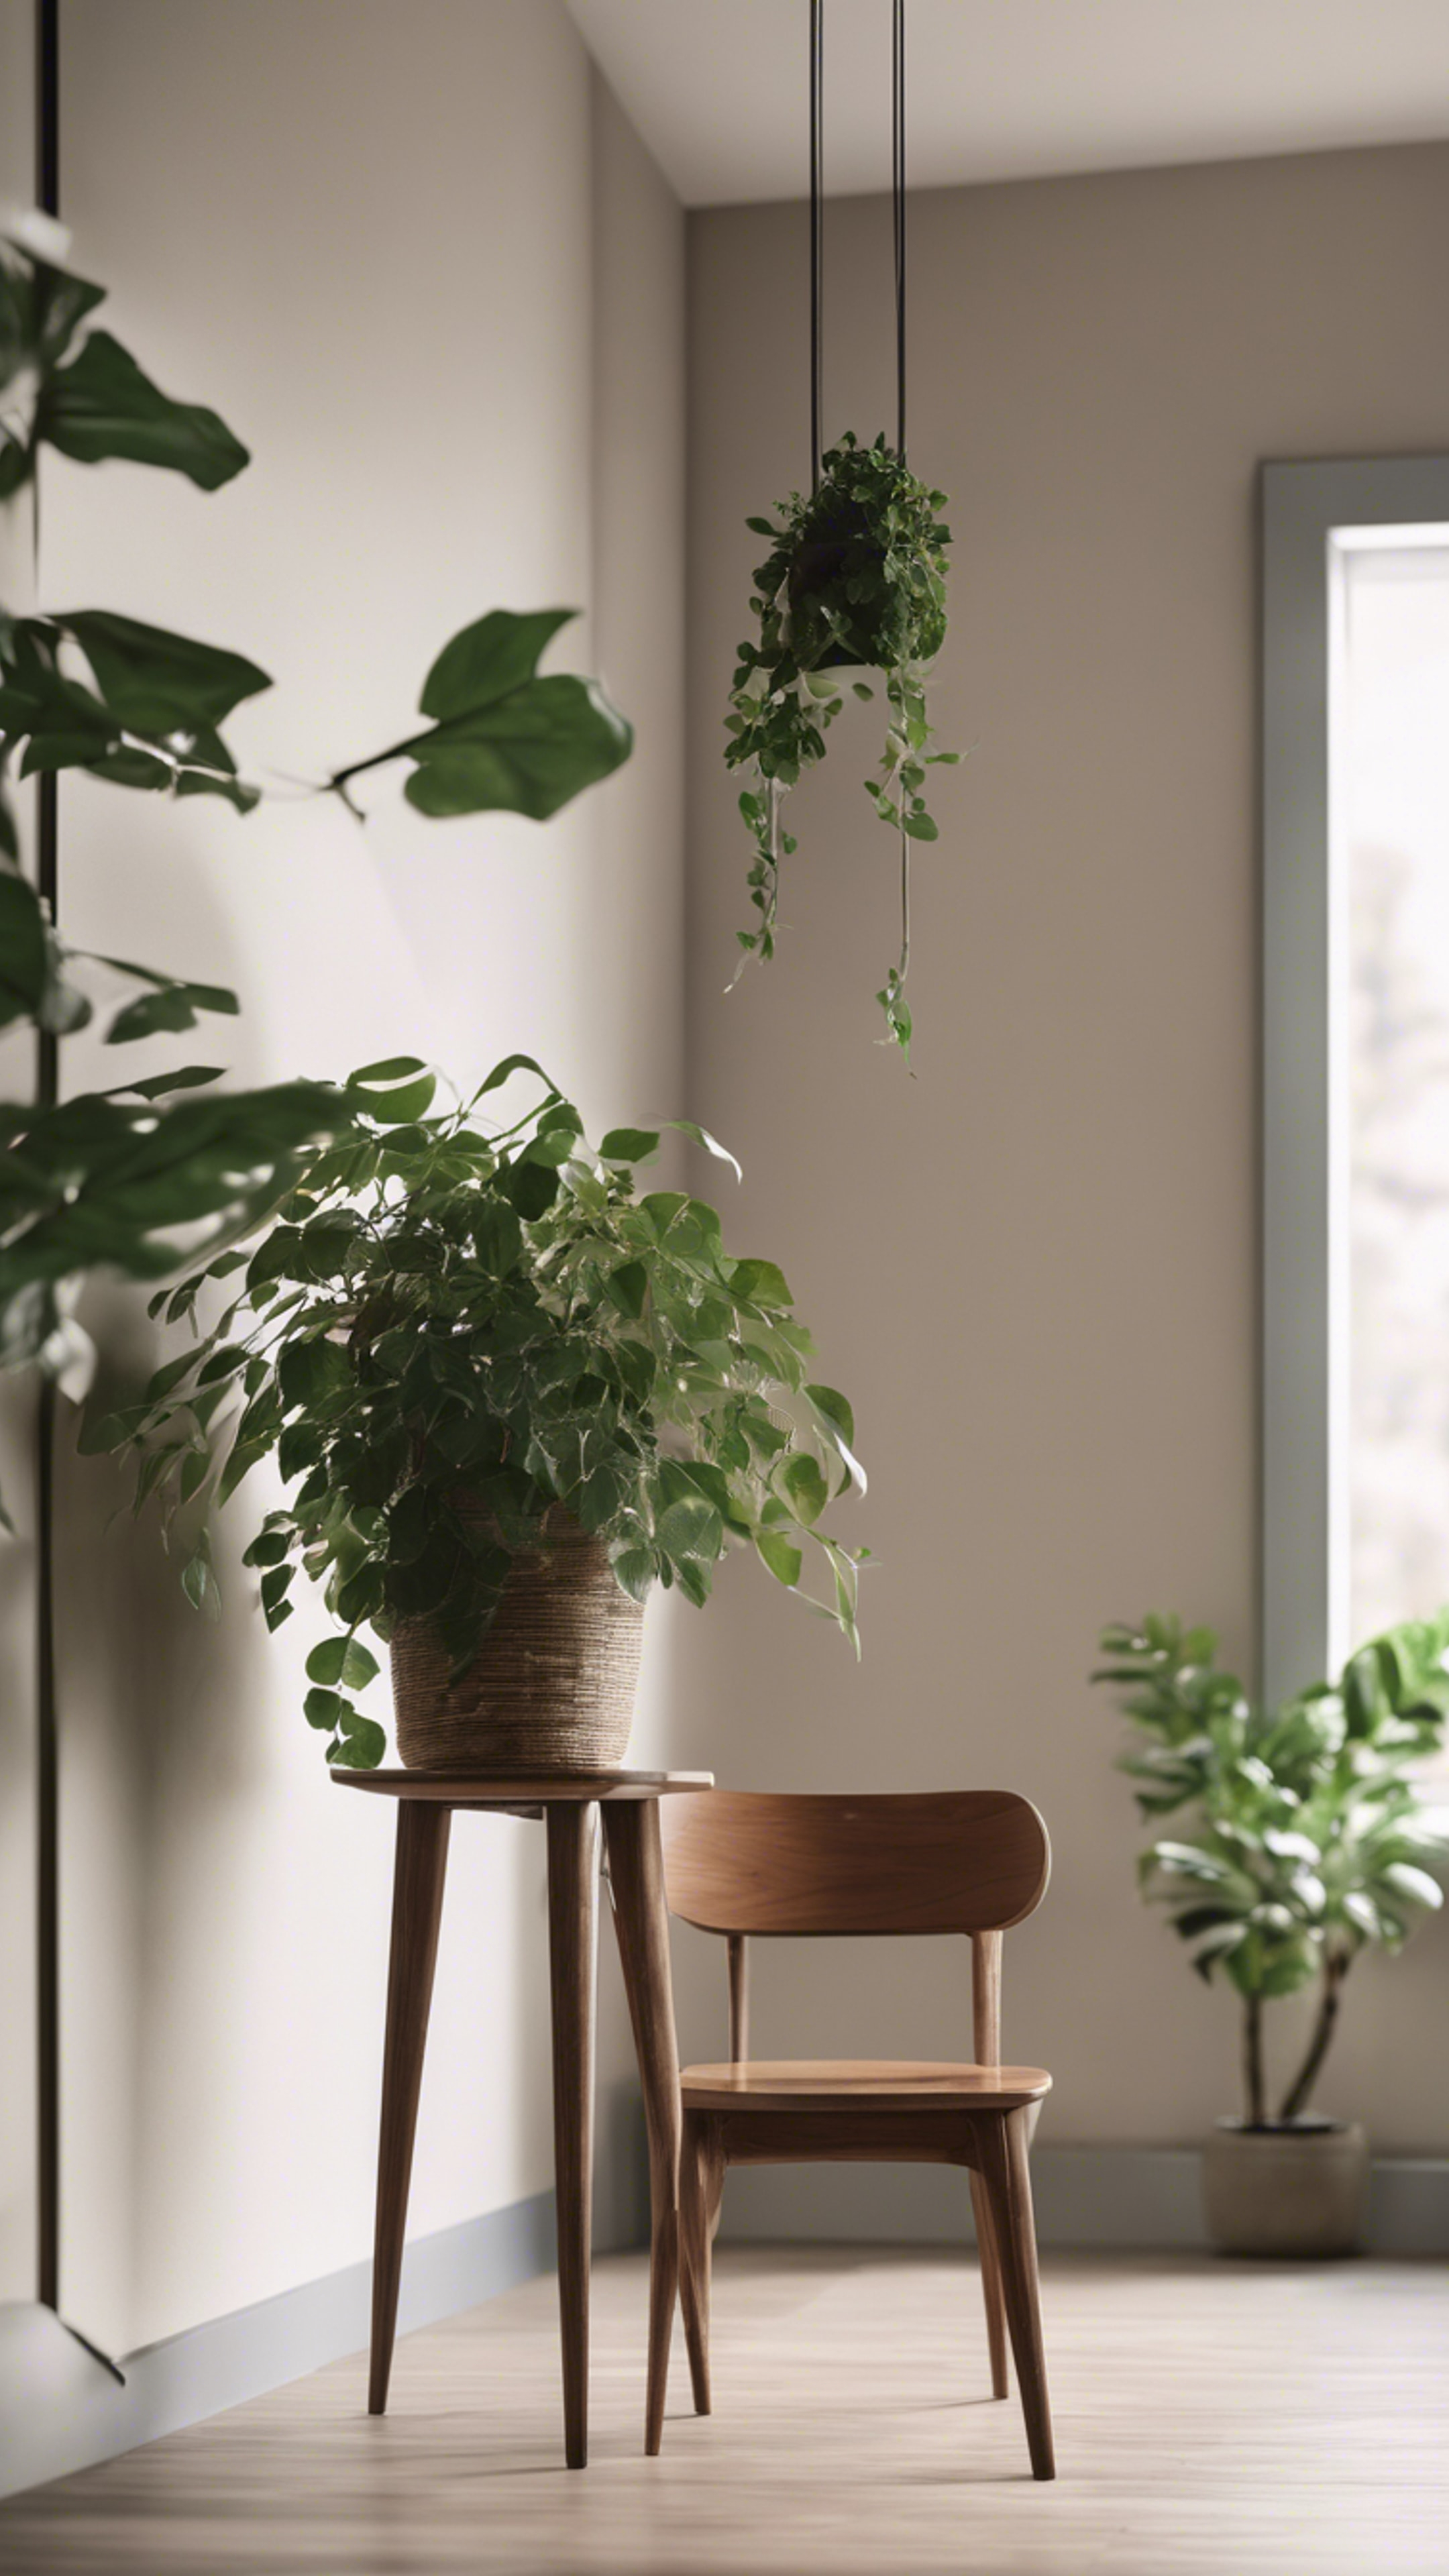 The corner of a minimalist room, featuring a hanging plant and a low, wooden side table. ورق الجدران[20a0de2ec9c541069b04]